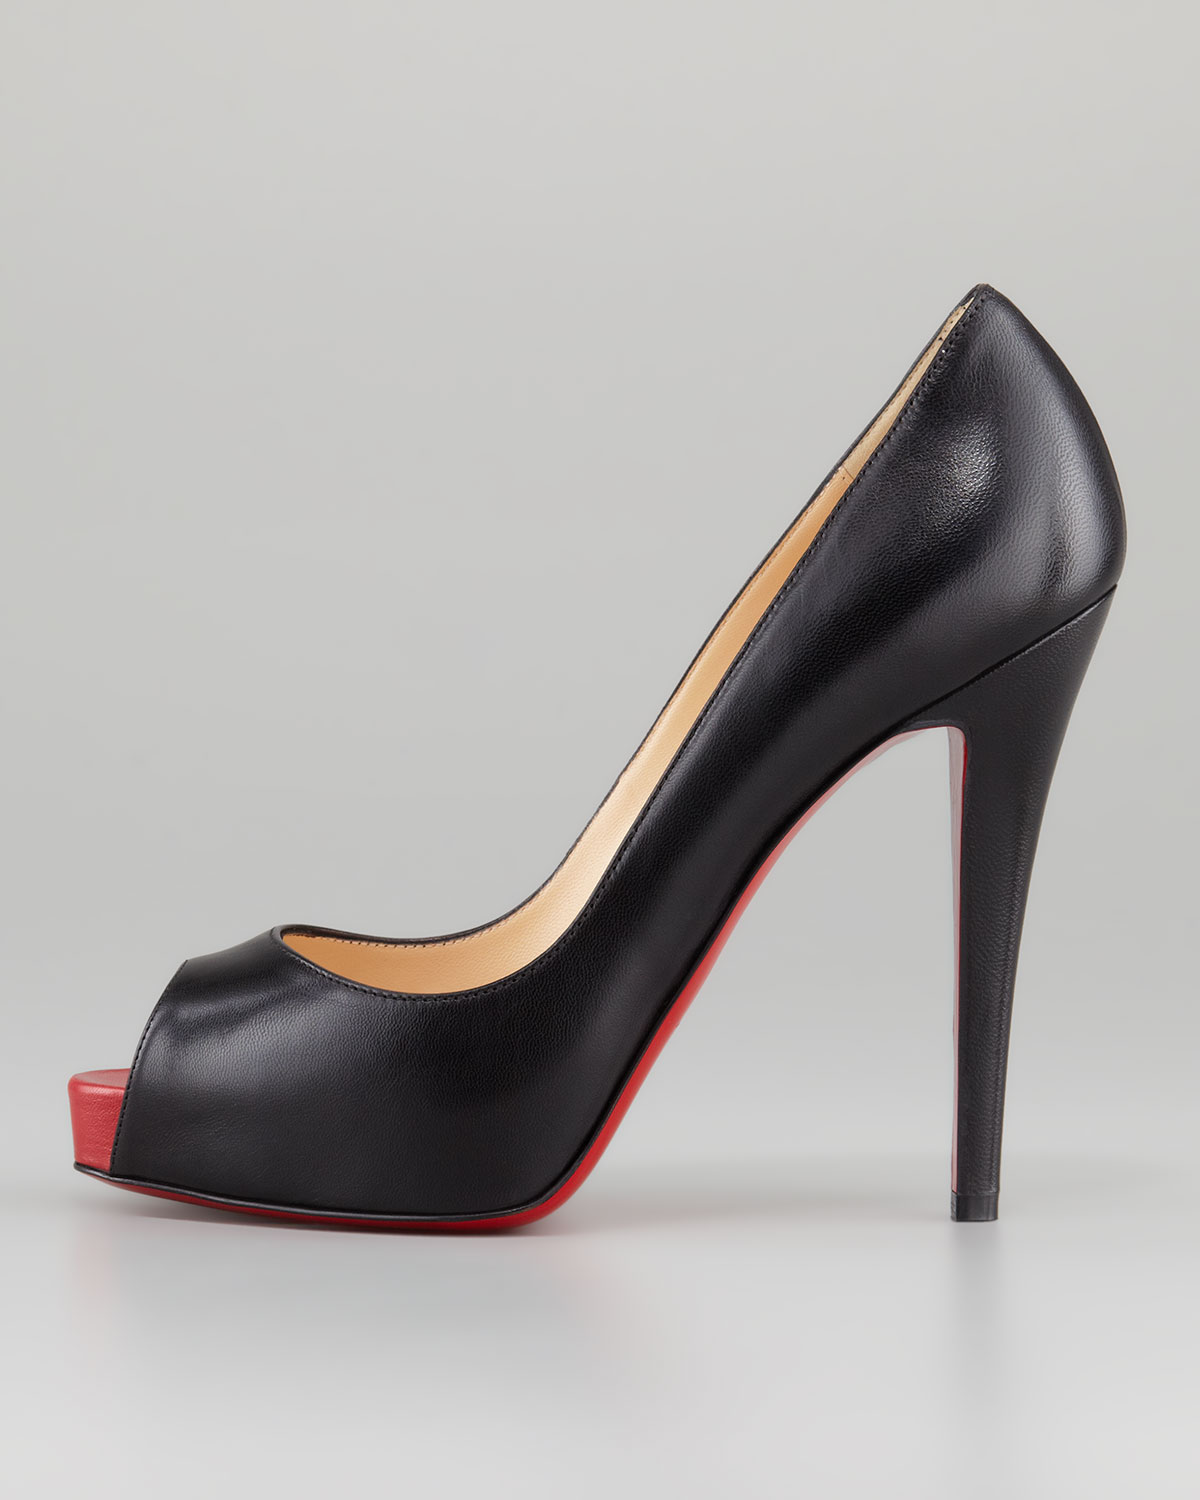 Christian louboutin Very Prive Leather Platform Red Sole Pump in ...